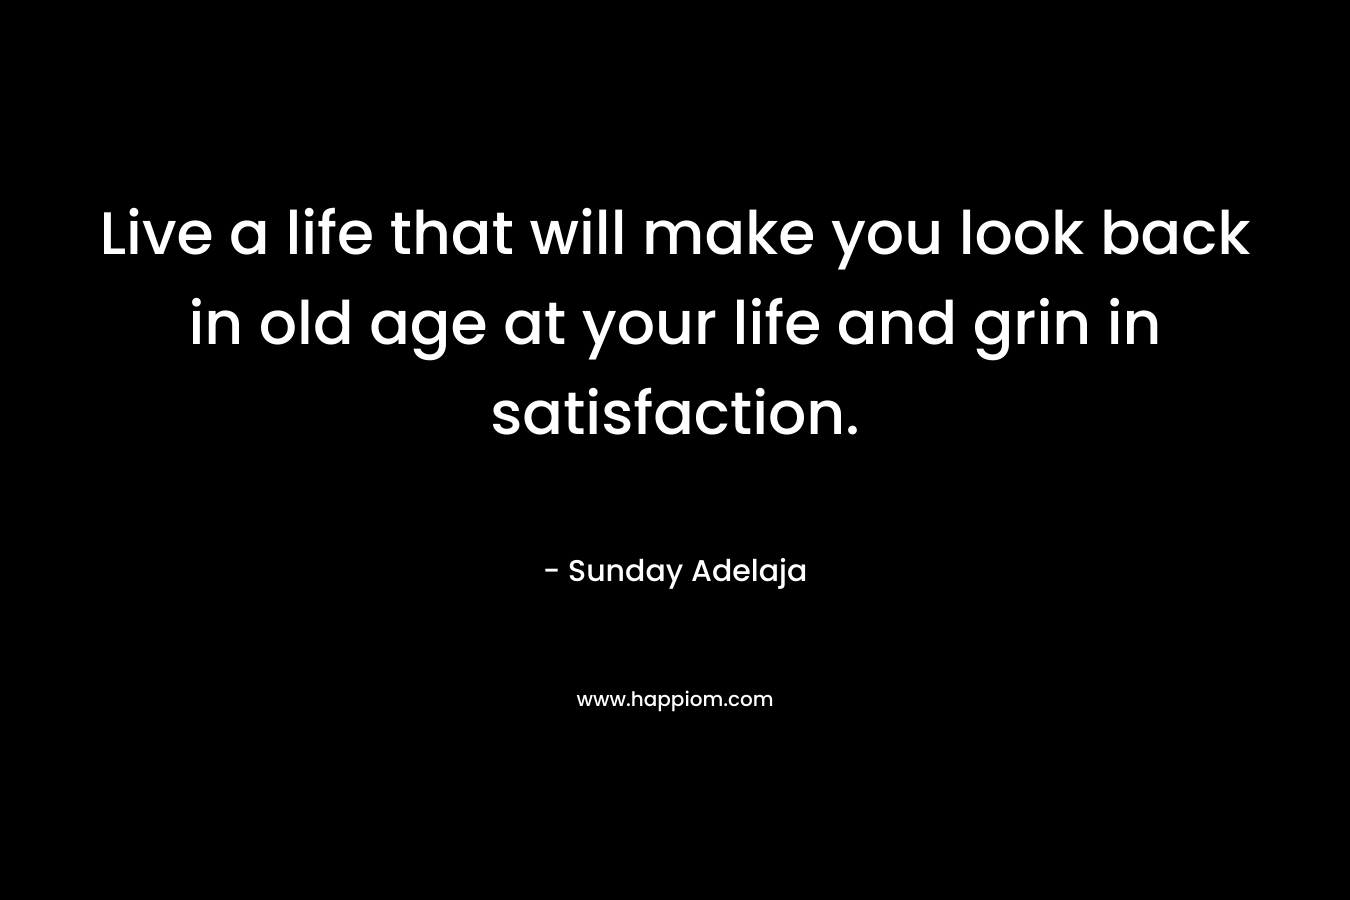 Live a life that will make you look back in old age at your life and grin in satisfaction. – Sunday Adelaja